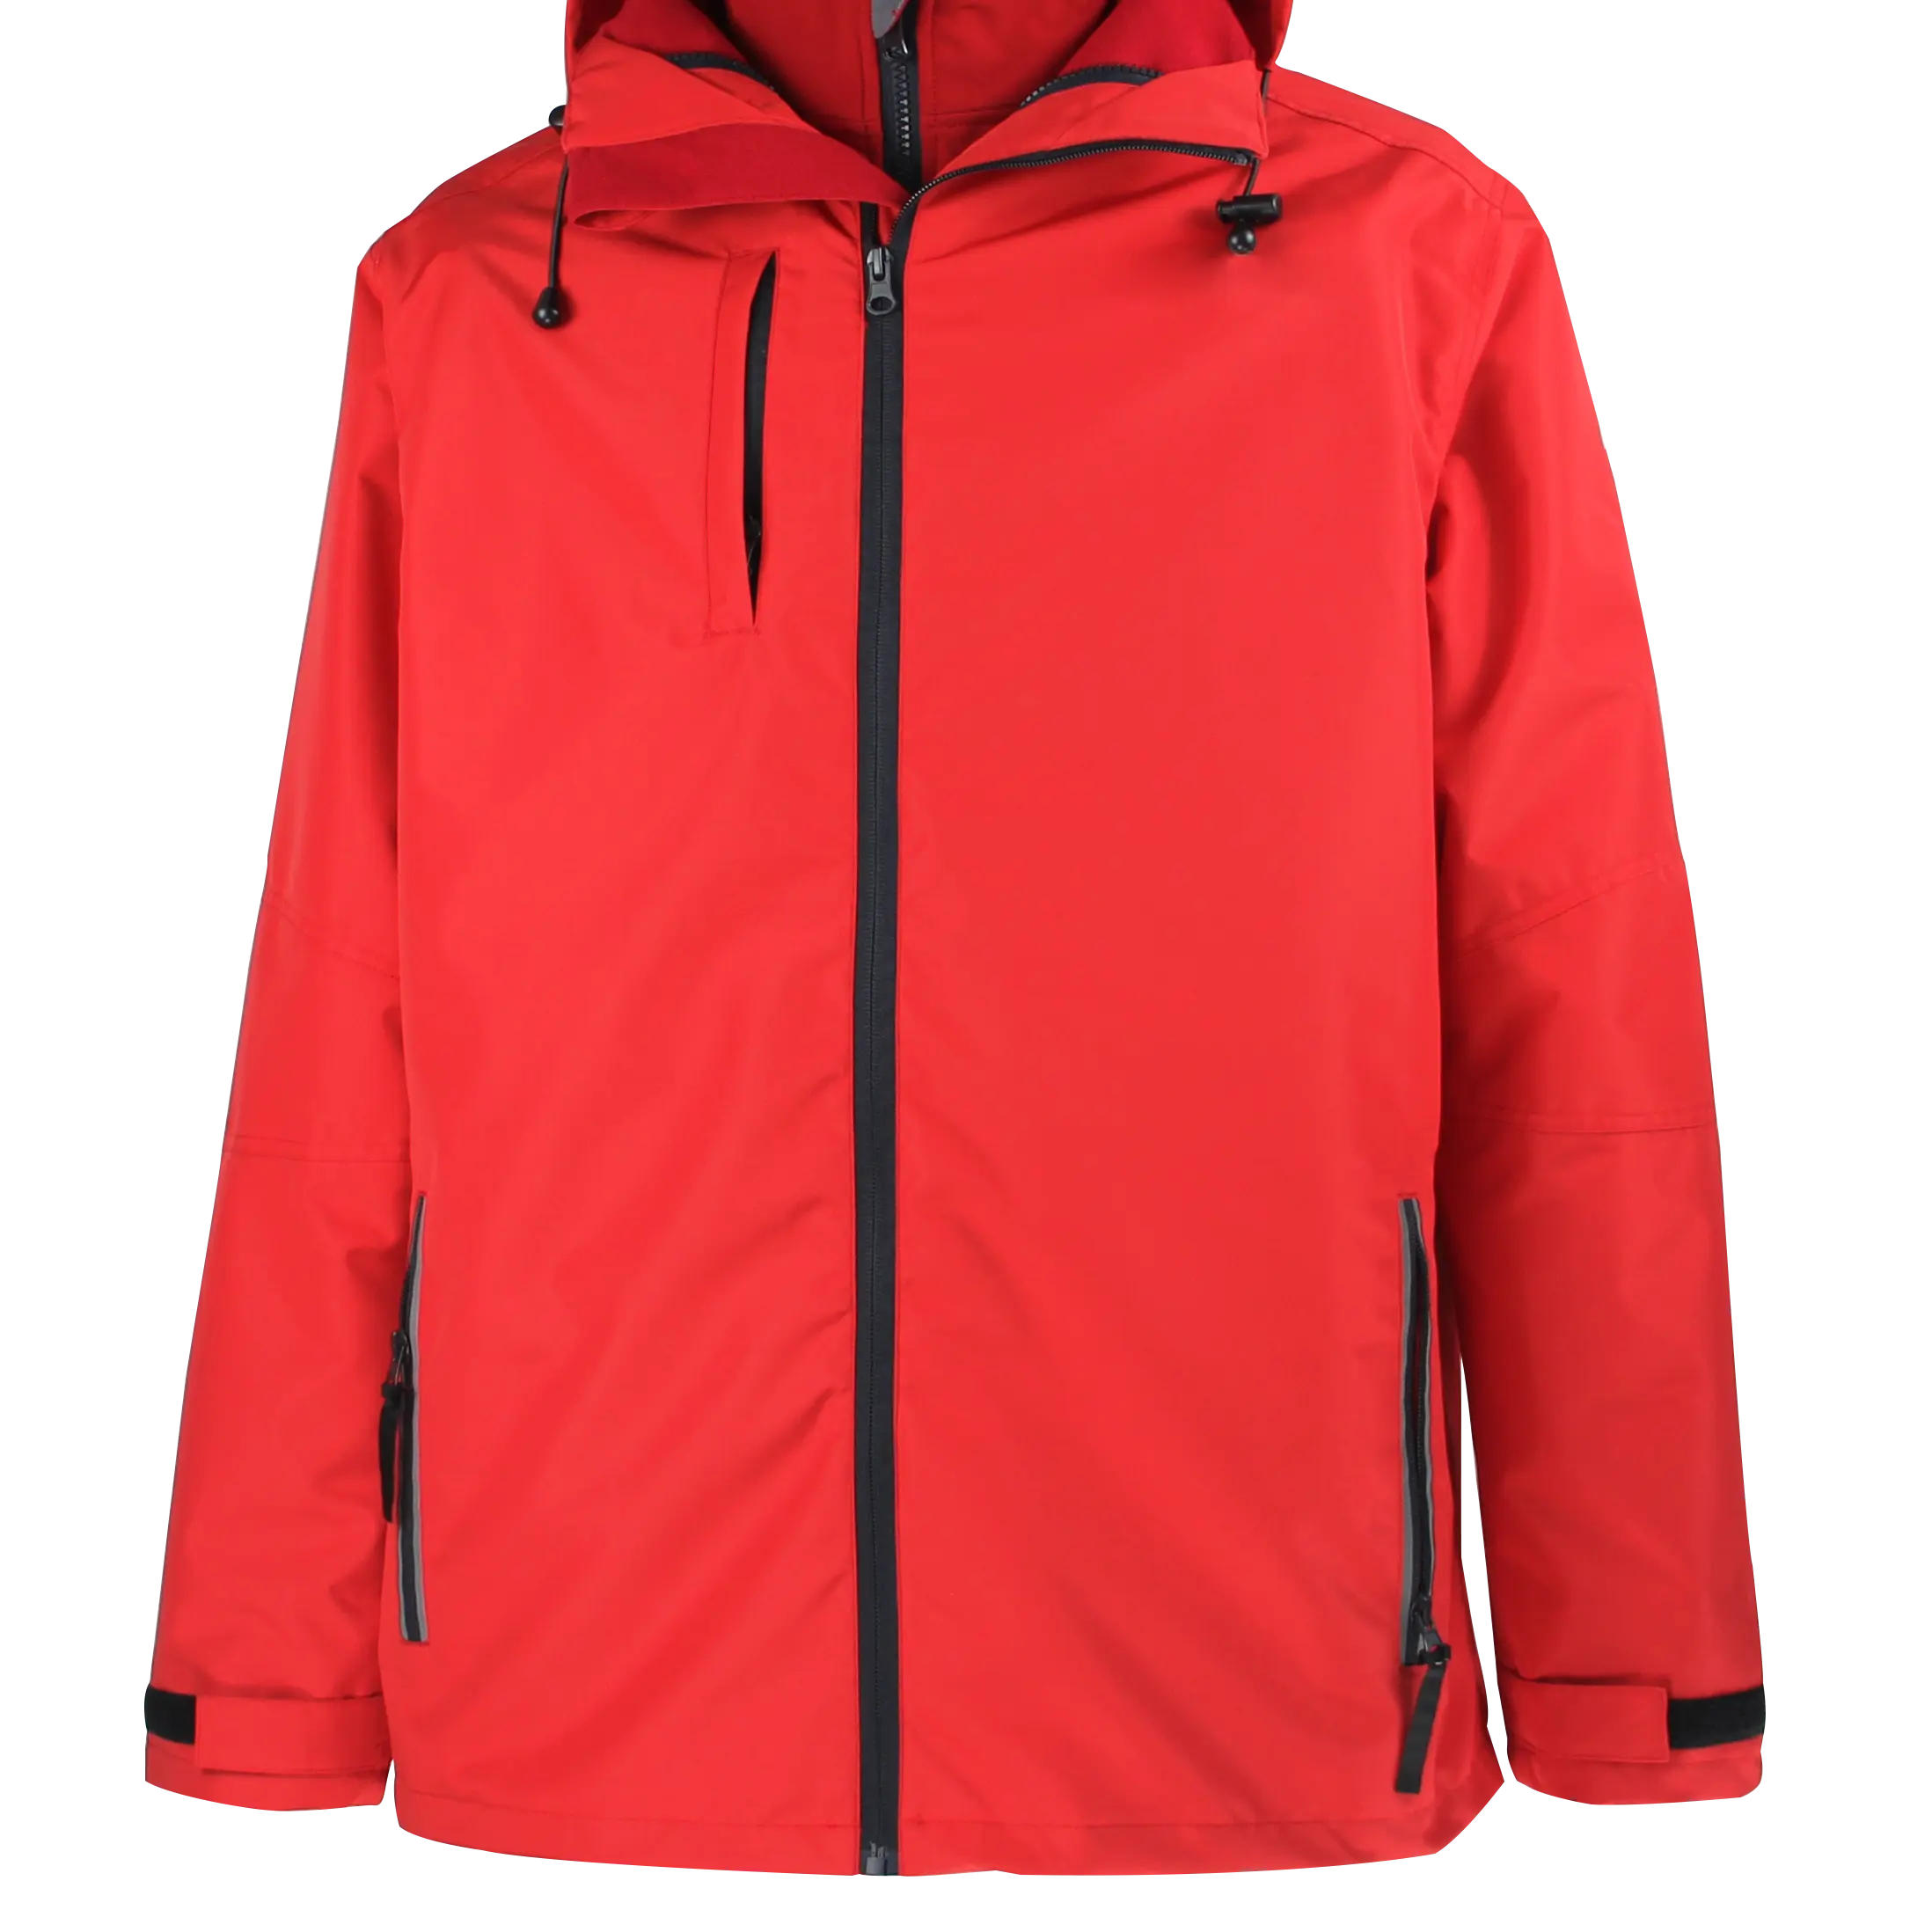 Work Clothes Breathable Waterproof Red Rain Jacket Wear-Resistant High Quality Work Jacket